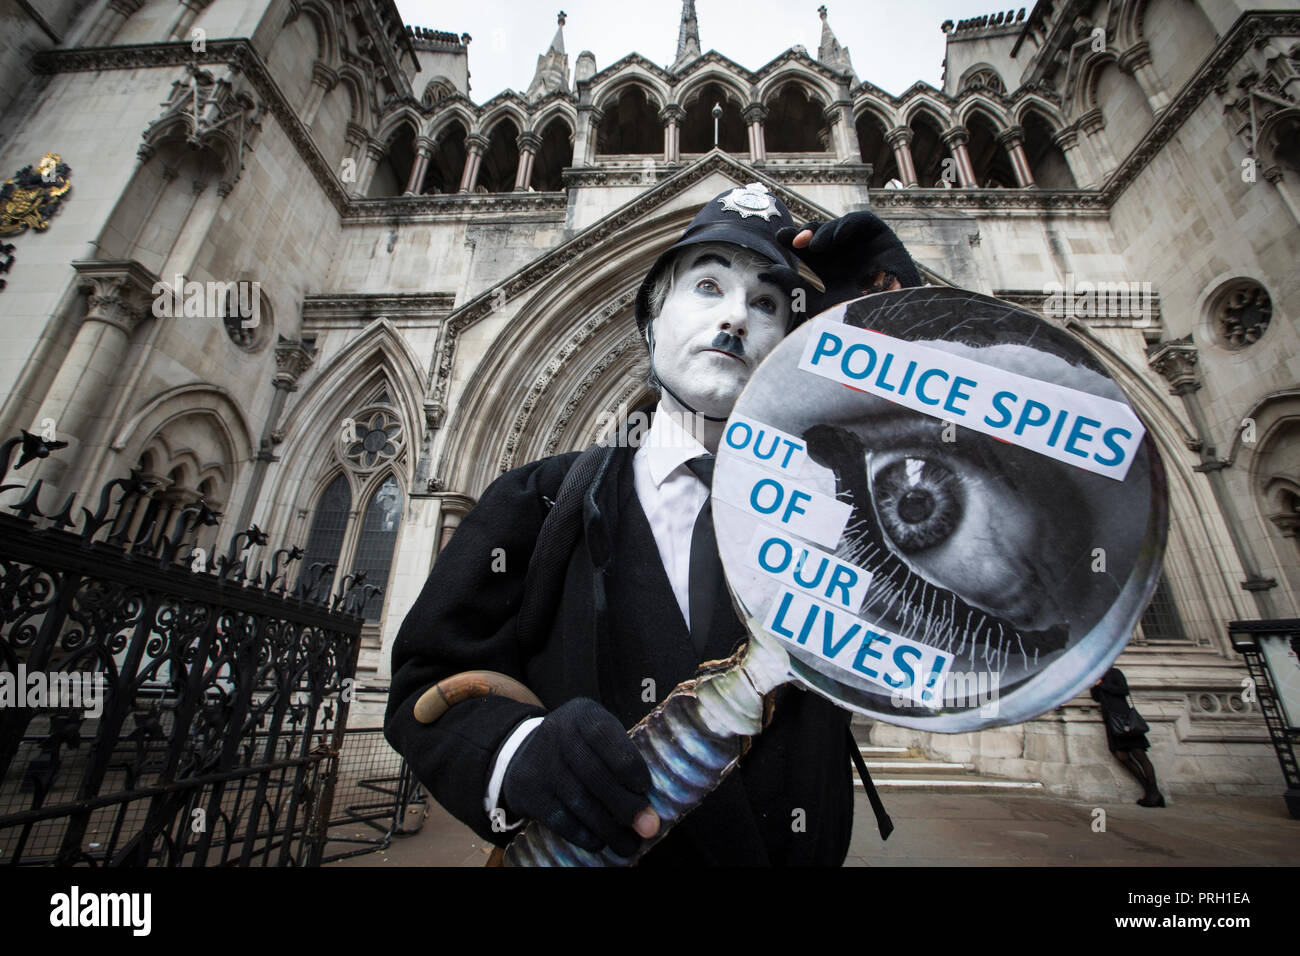 London, UK. 3rd Oct 2018. Protester Against Undercover Police Officers outside High Court, Royal Courts of Justice, London, UK 3rd October 2018. The public have been shocked that women have been deceived into intimate relationships with undercover police officers in the United Kingdom. One woman is bringing a case about the human rights abuses she suffered in her relationship with undercover police officer Mark Kennedy while he infiltrated social and enviromental campaign groups. Credit: Jeff Gilbert/Alamy Live News Stock Photo